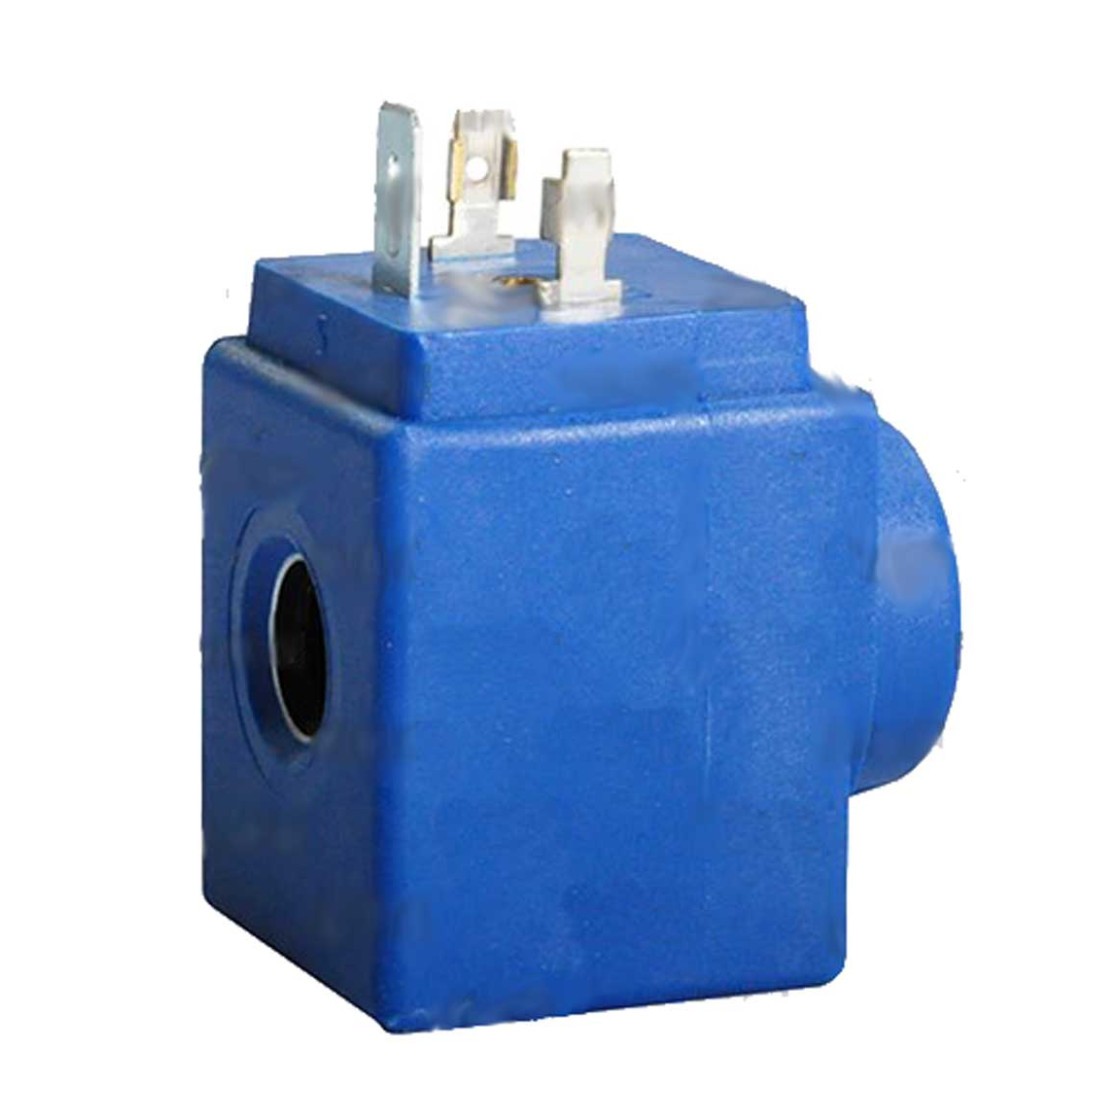 Electromagnetic valve coil CASTEL, HF2,9300/RA2, 24Vac,50/60Hz Automotive parts of refrigerated freezers for domestic industrial refrigeration equipment